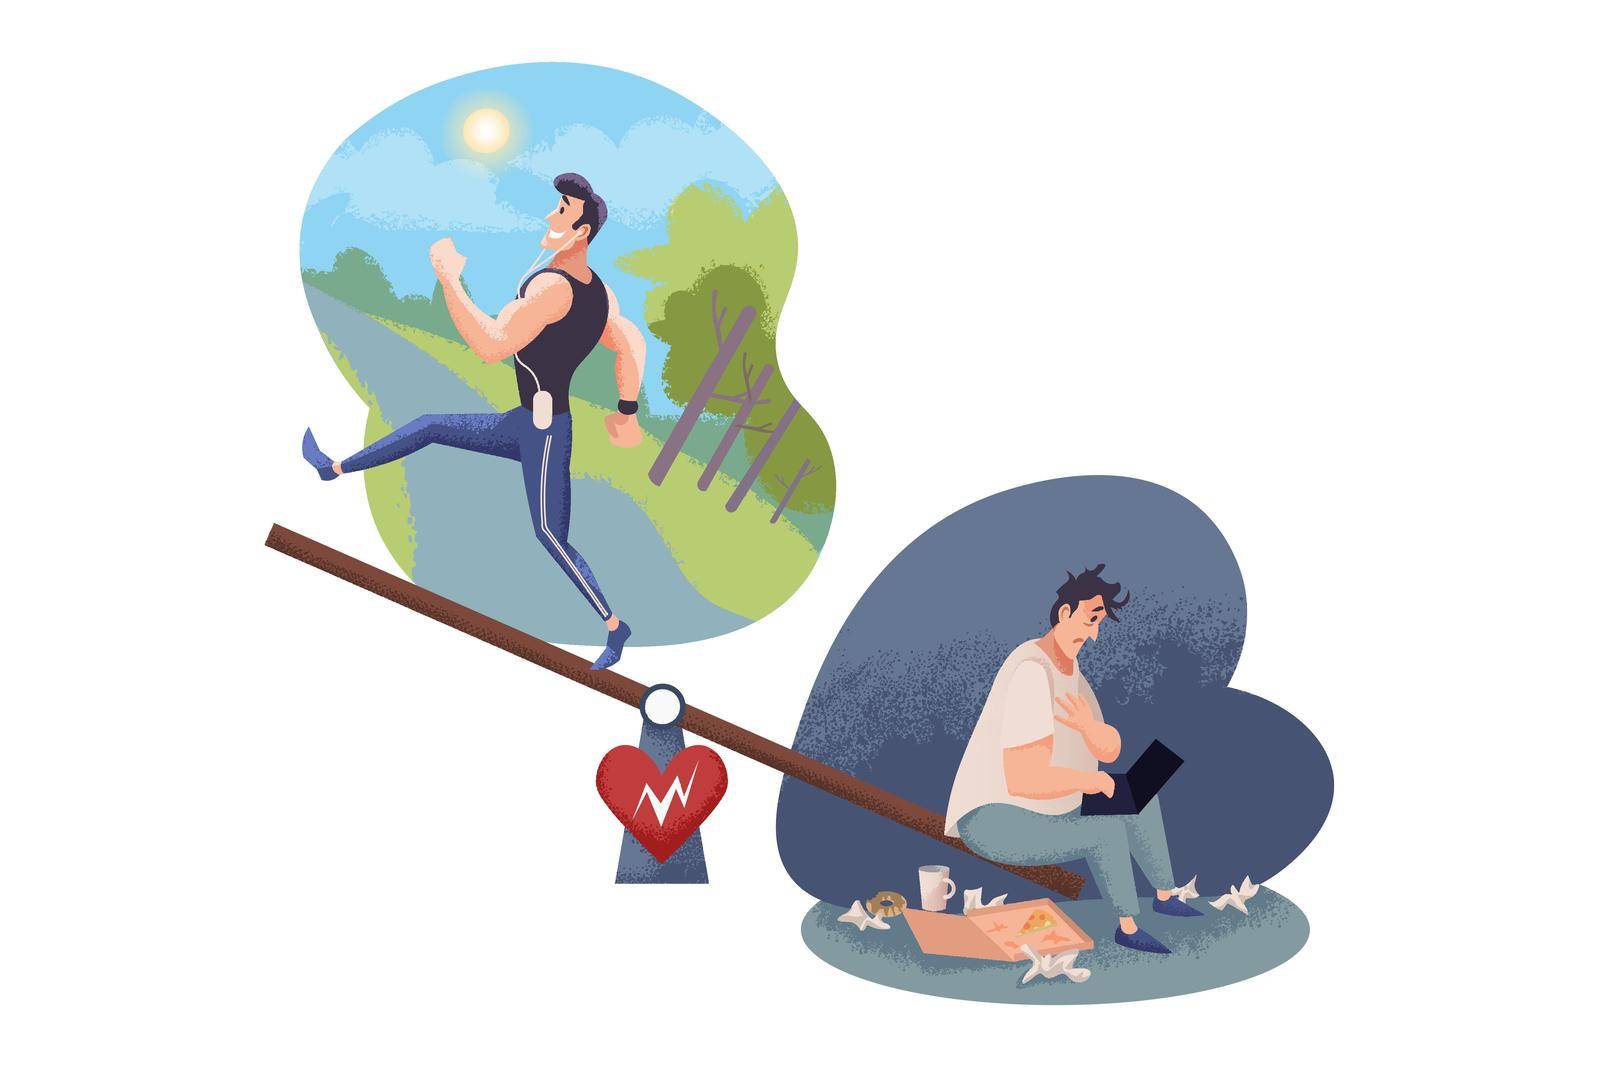 Healthcare, imbalance set concept. Conflict of interest. Healthy and unhealthy lifestyle comparison. Imbalance of sportsman and thick exhausted businessman freelancer working on laptop on swings.